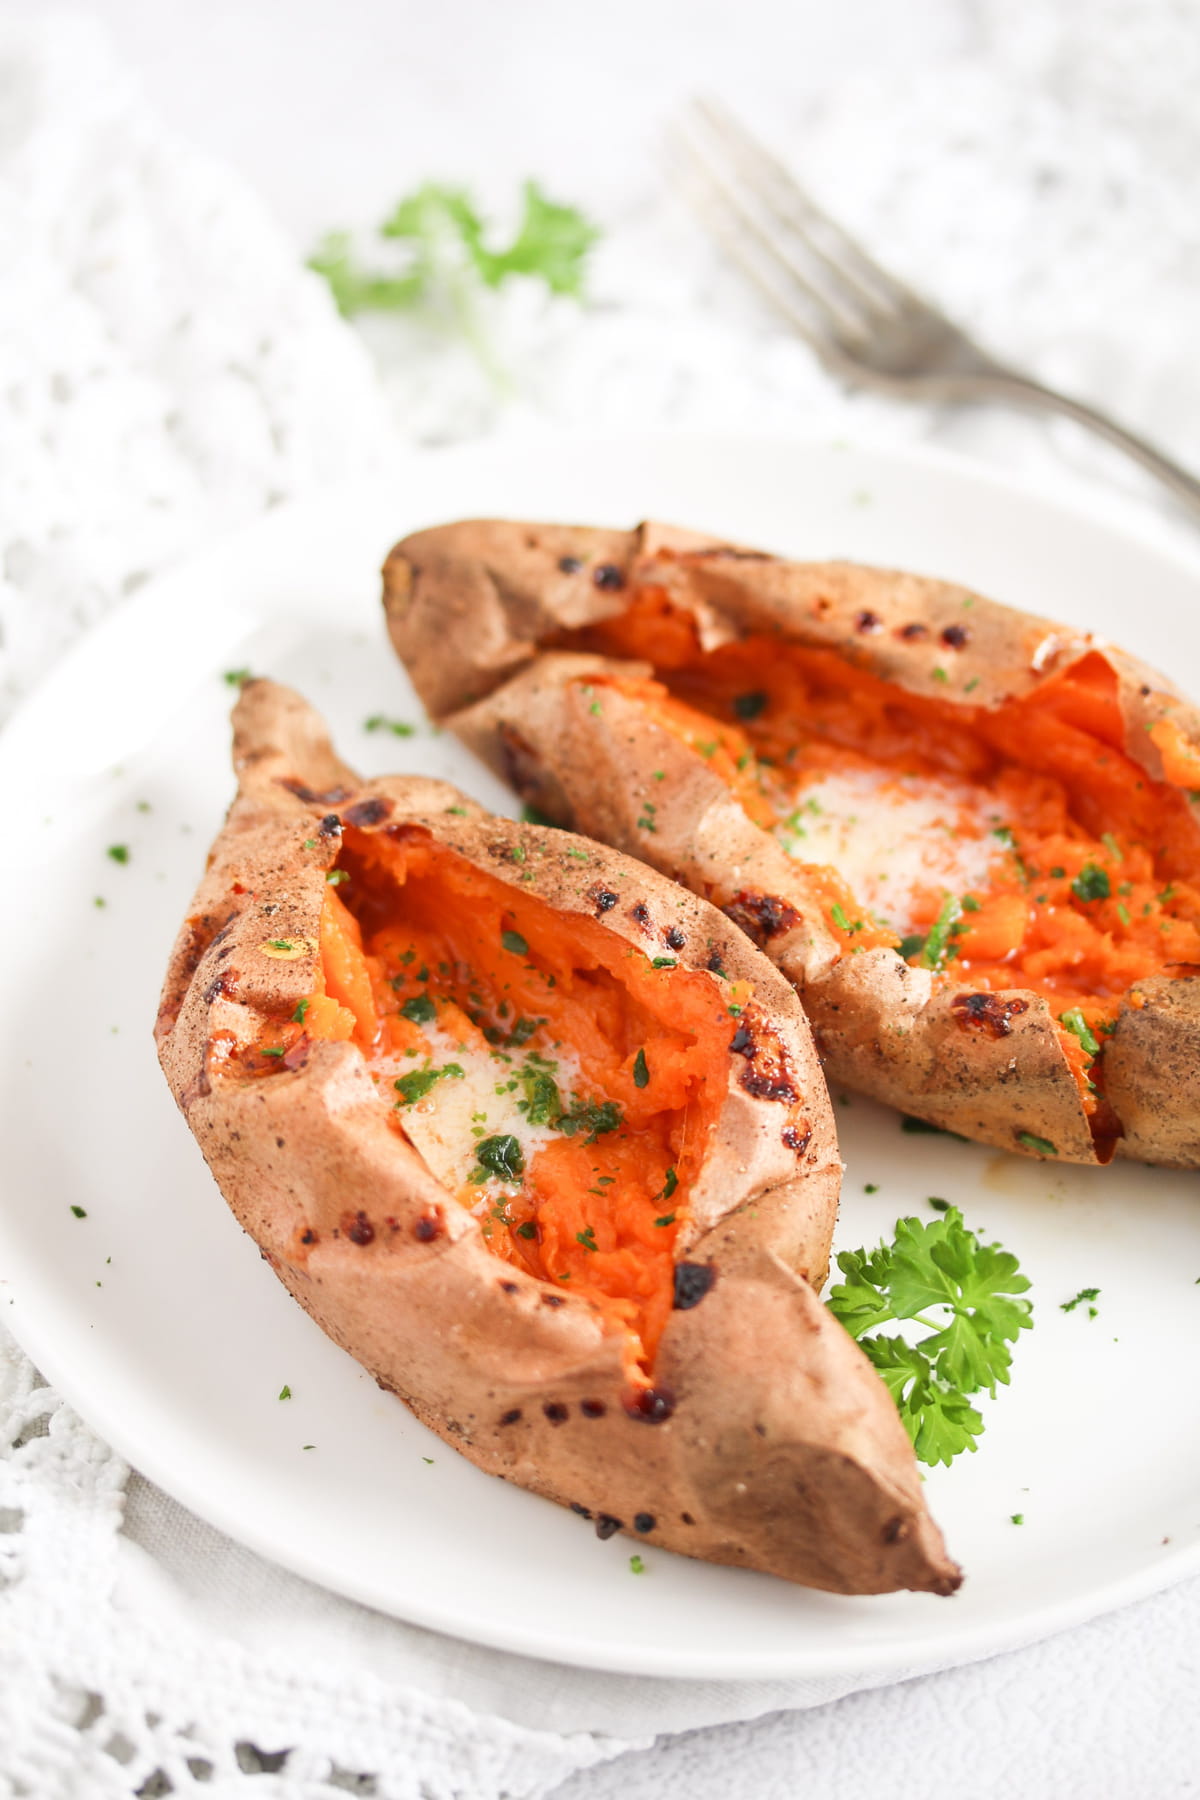 two baked sweet potatoes on a white plate sprinkled with parsley.